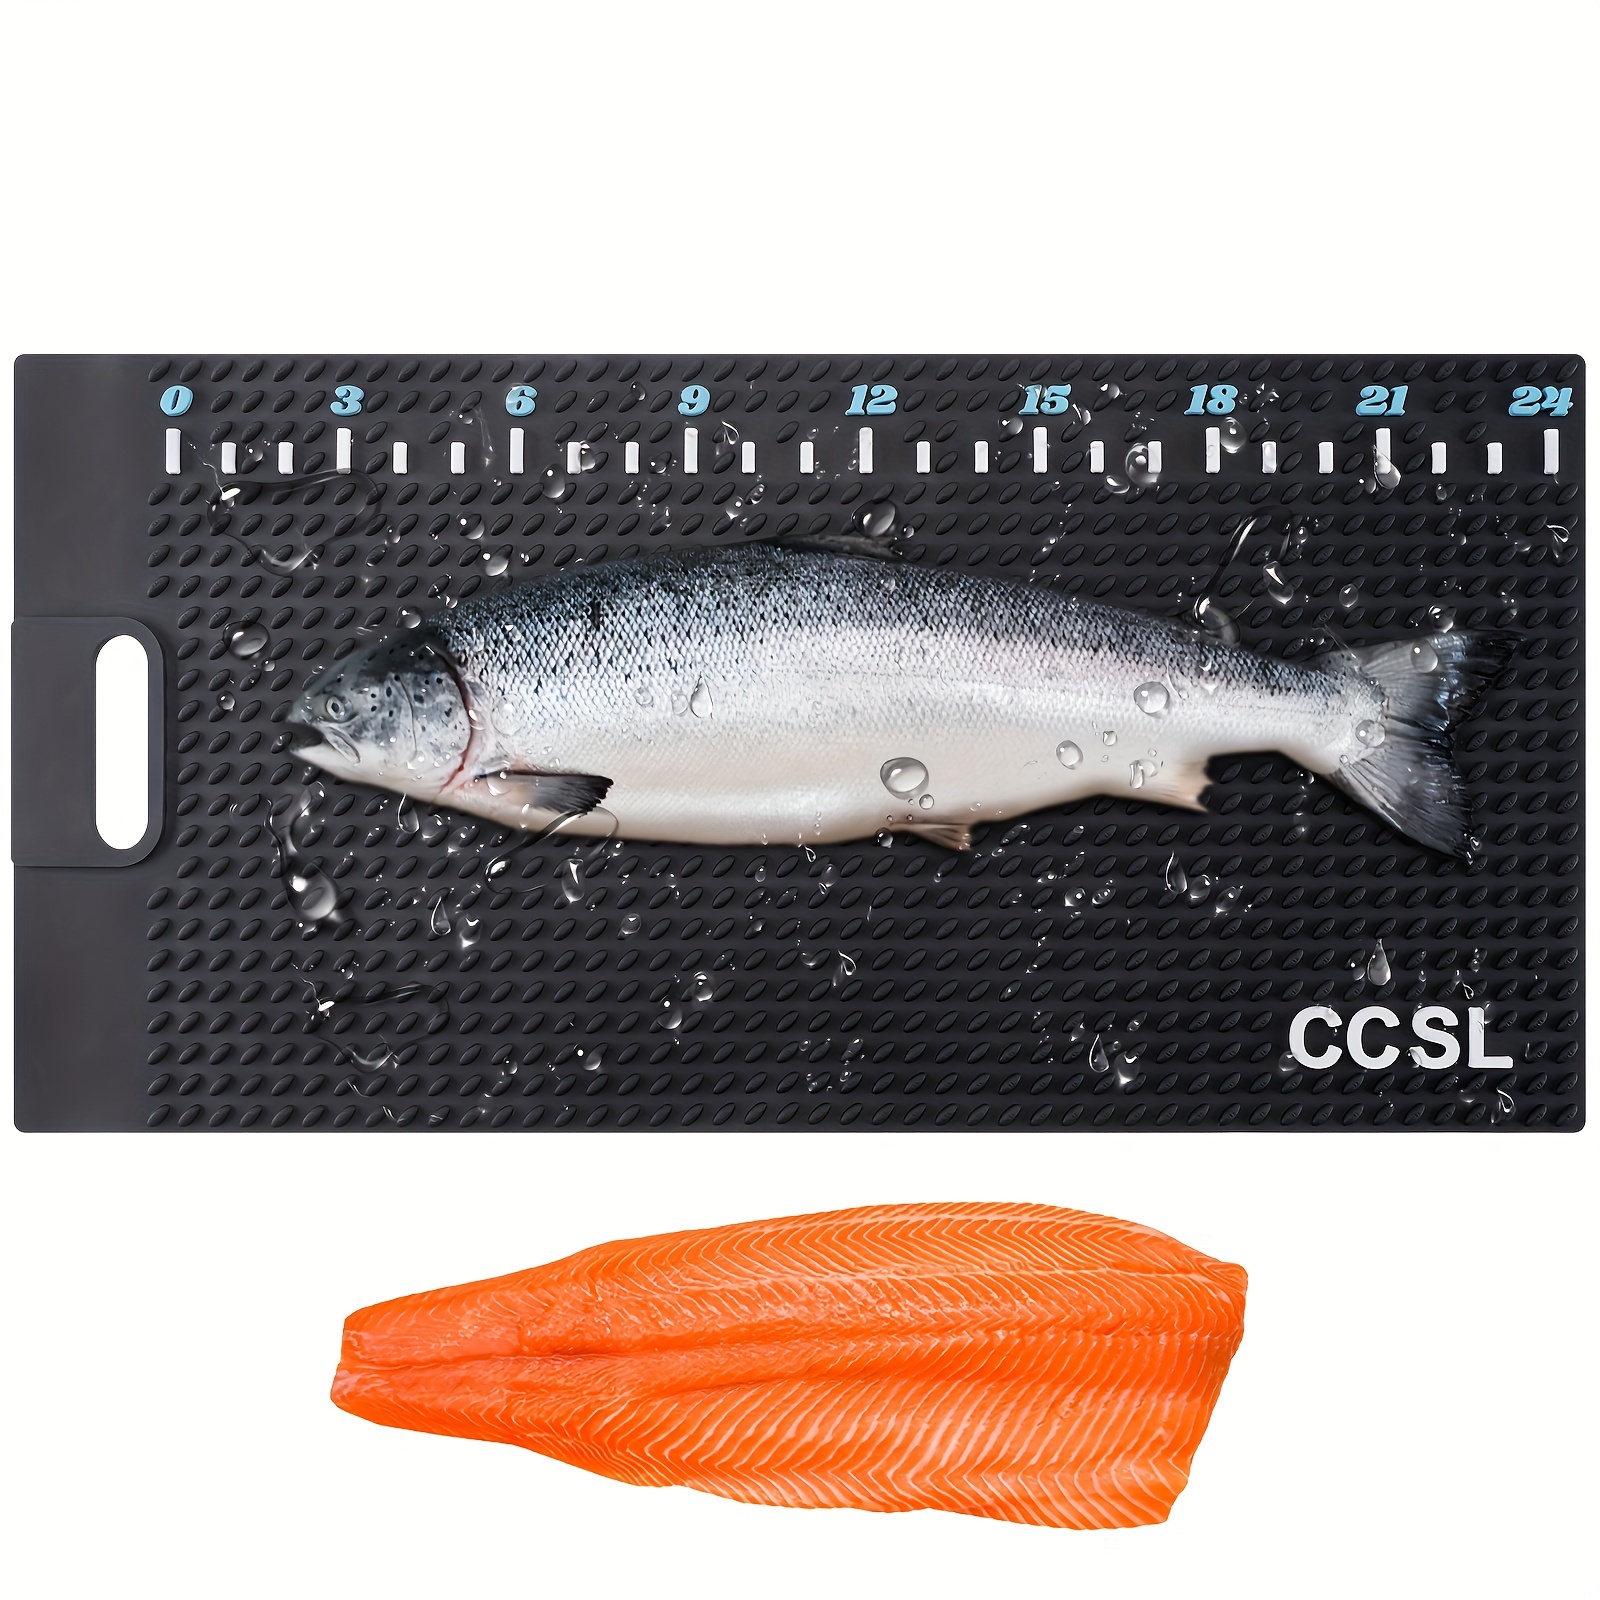 Fish Fillet Mat, Roll-up Fish Cleaning Mat With Fish Ruler, Easy To Clean  And Portable Fish Cleaning Board, Non-slip Fish Scaling Cleaning Kit For Fir